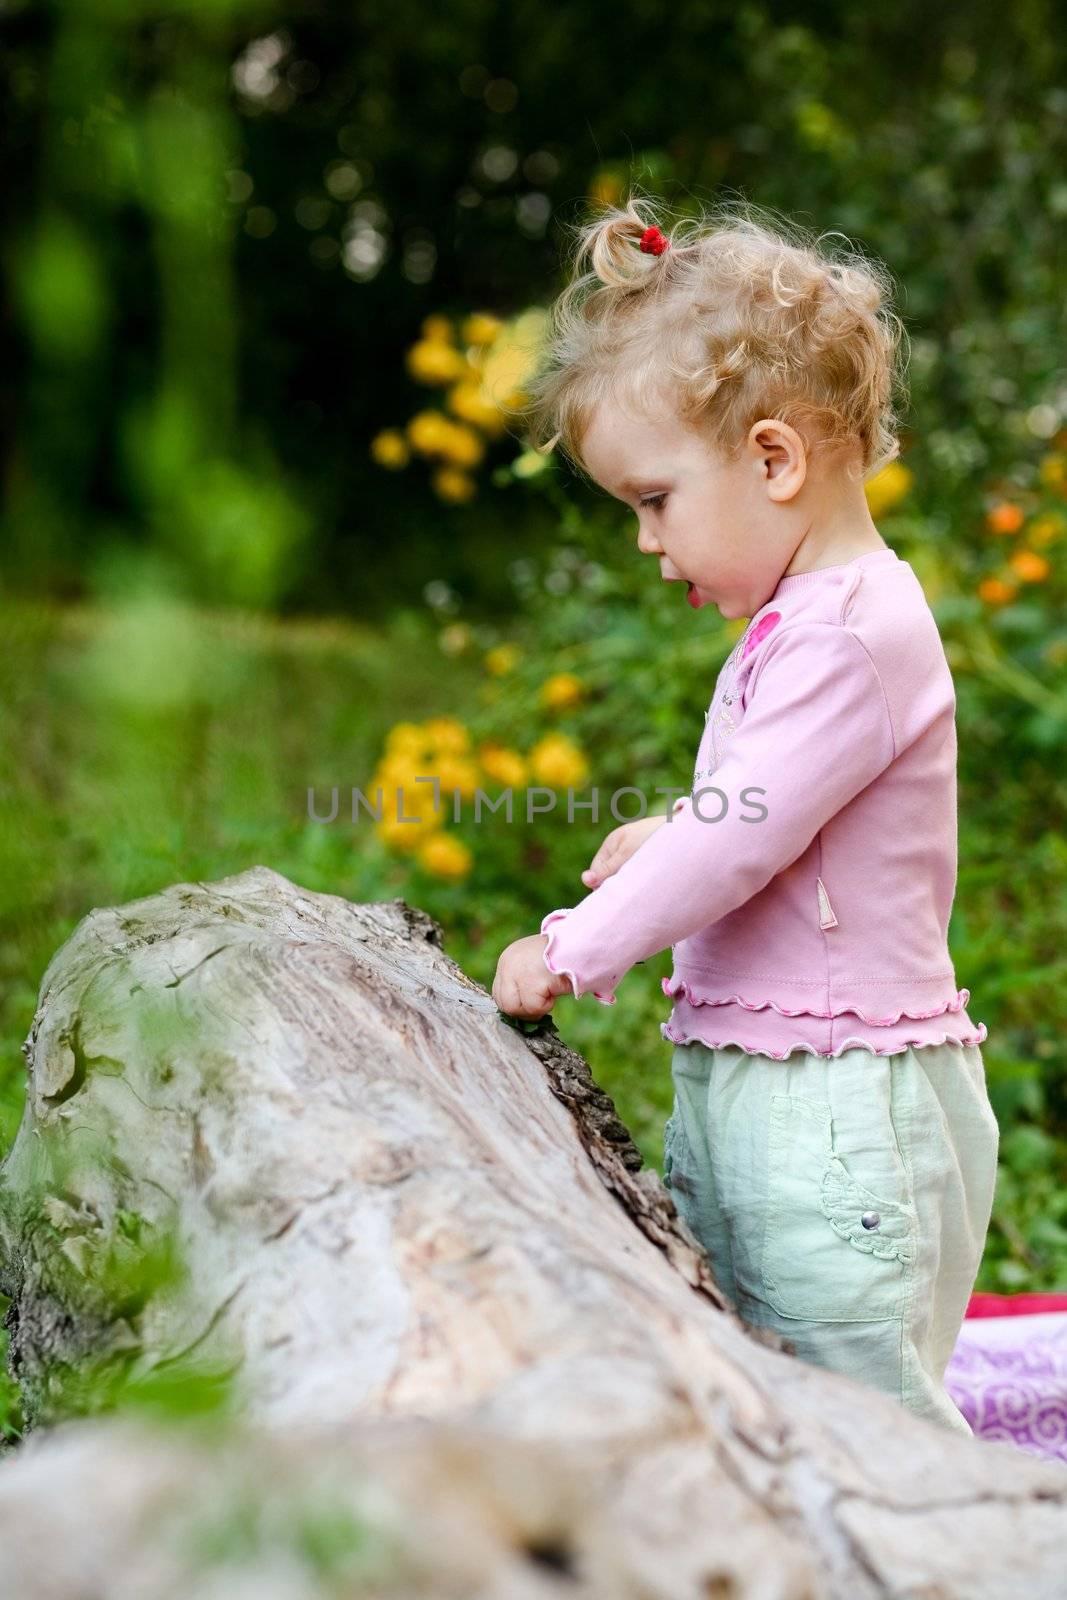 An image of little girl playing outdoor